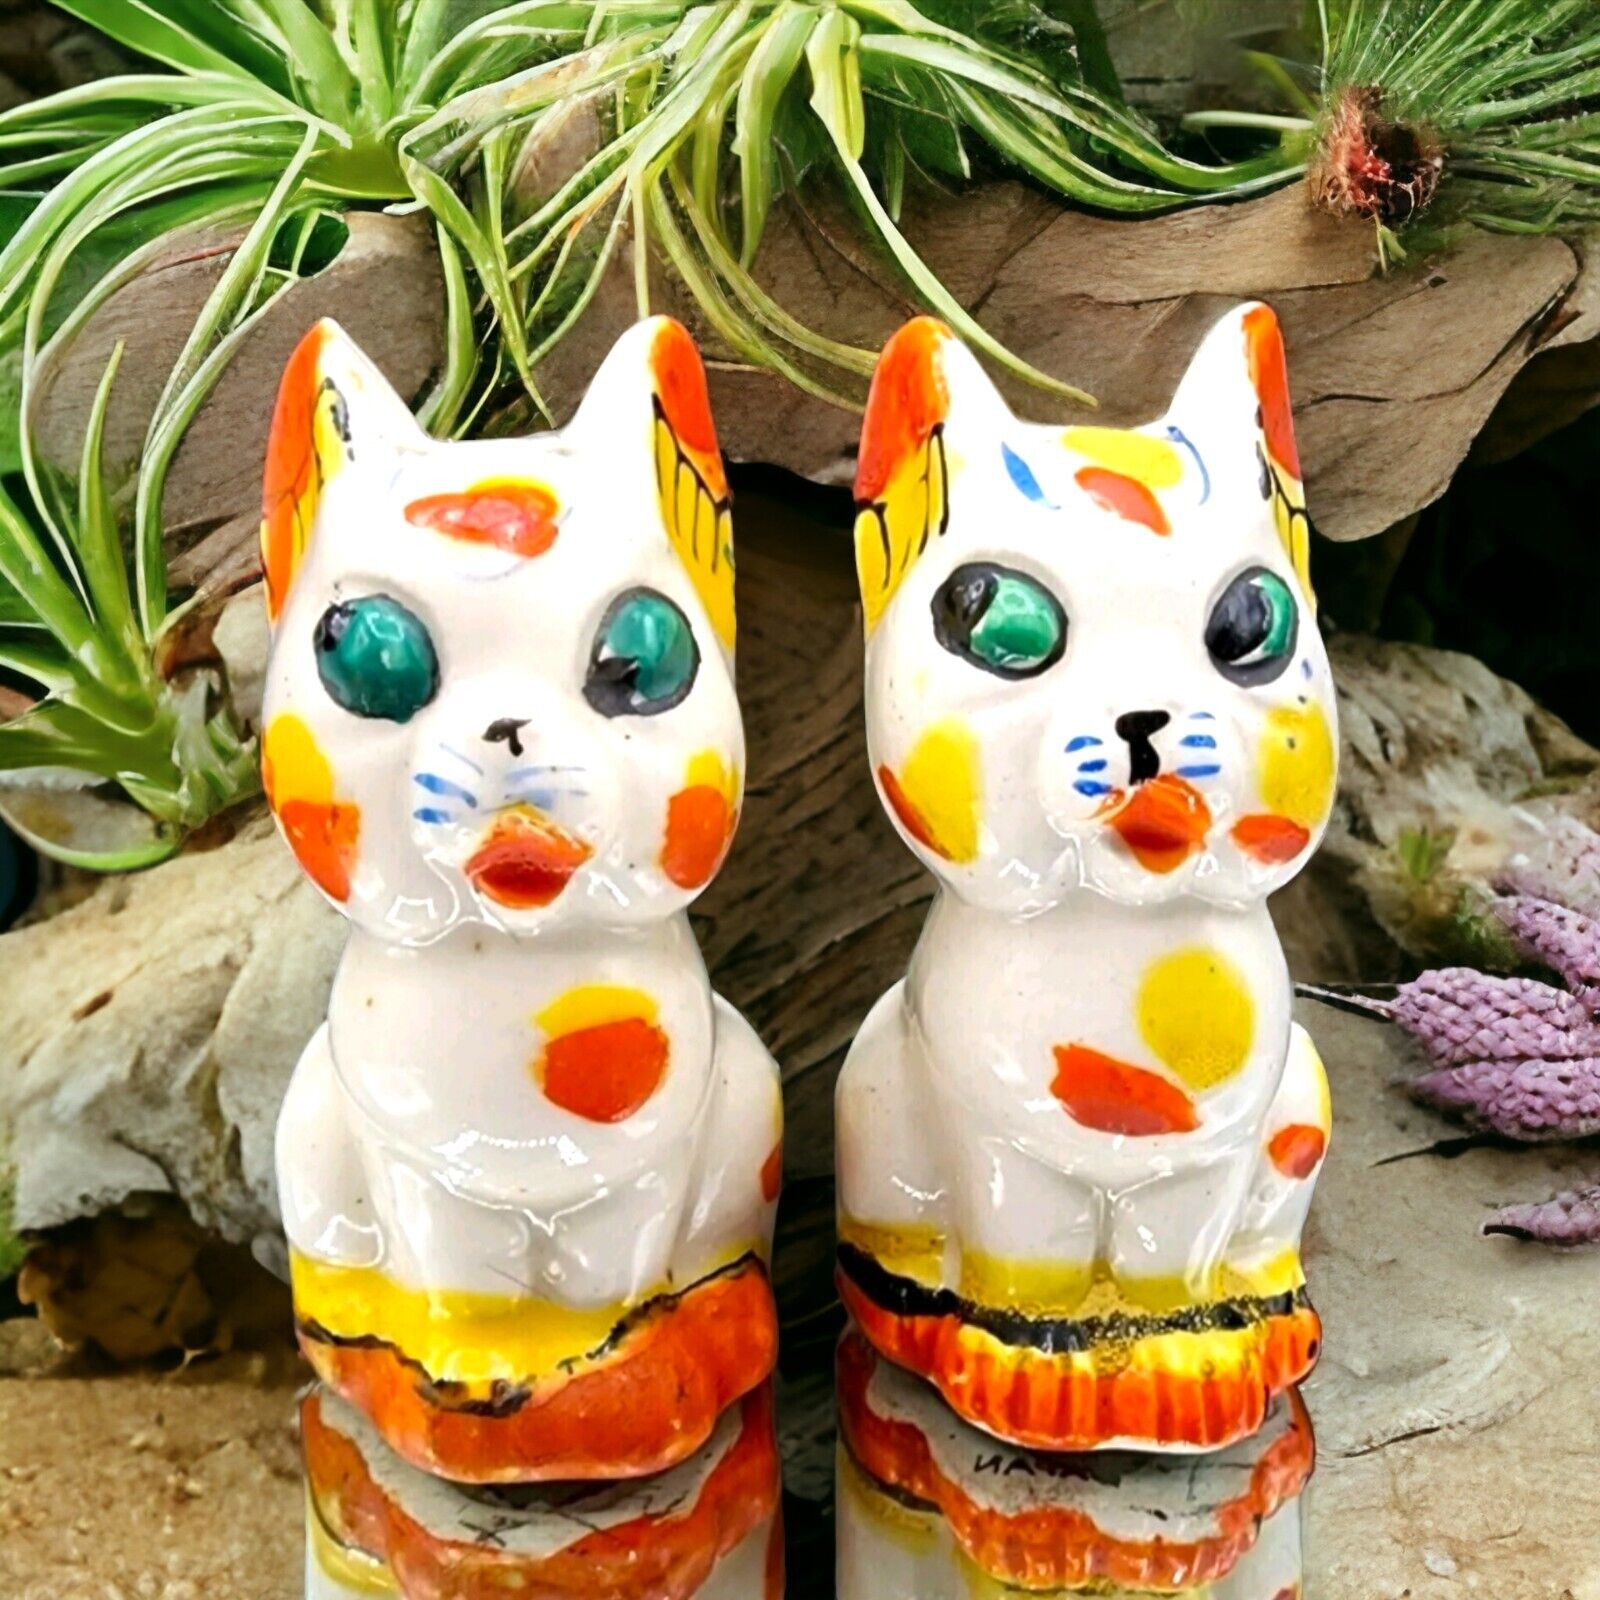 Calico Cats Salt Pepper Shakers 1950s Japan Kitsch Kitchen Crazy Calico Kitty